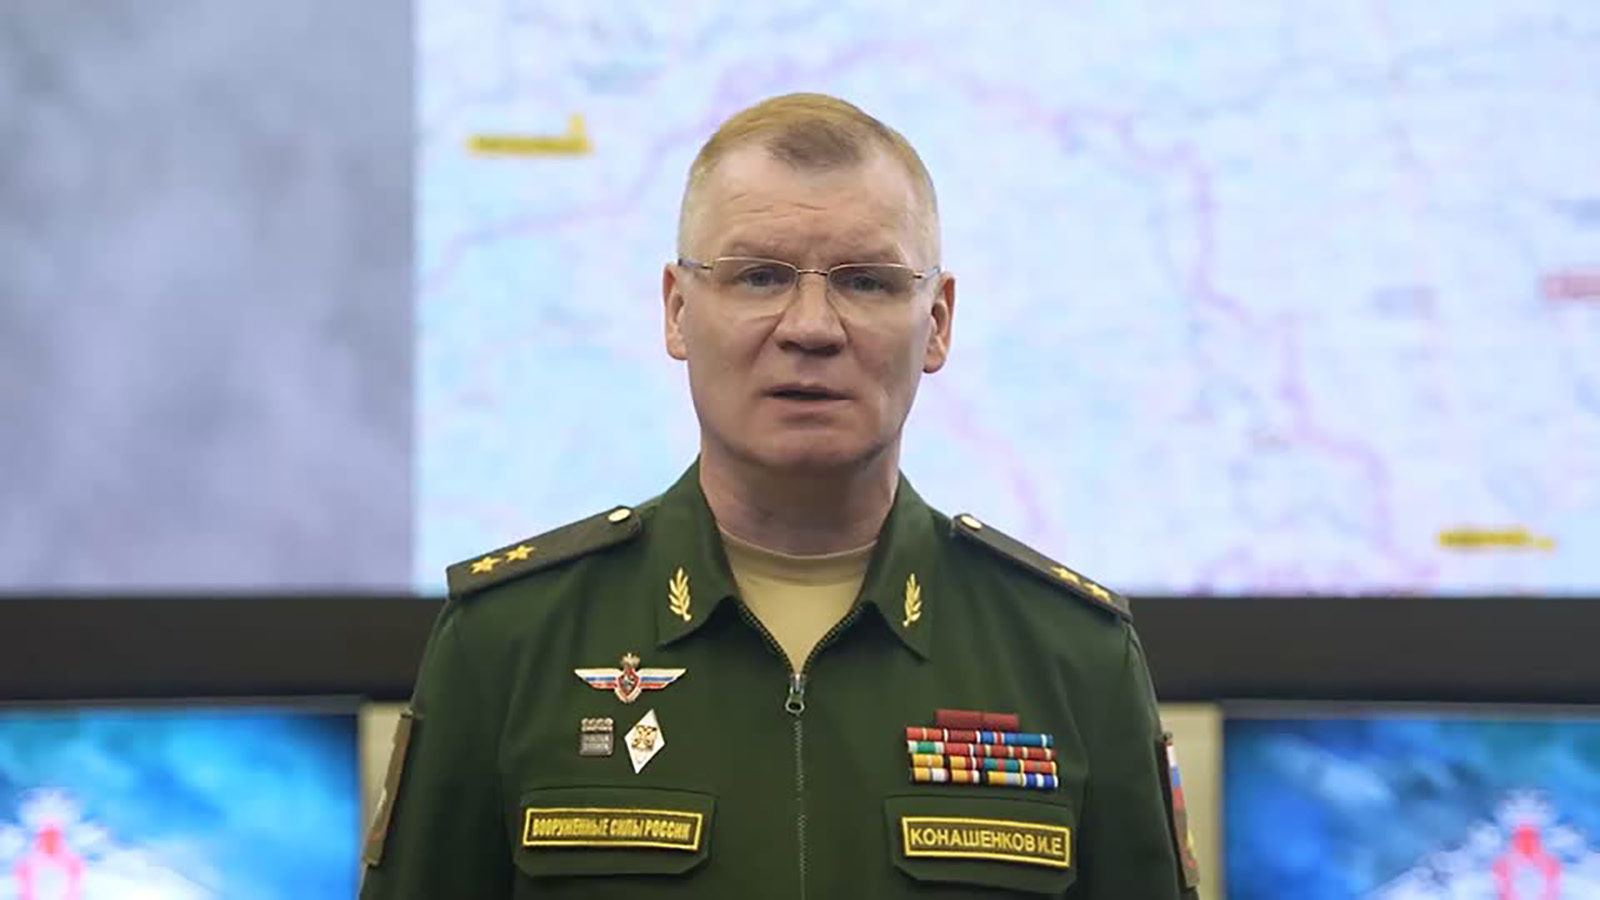 On January 2, the Russian Ministry of Defense Spokesperson spoke about the Makiivka shelling incident in Moscow, Russia.